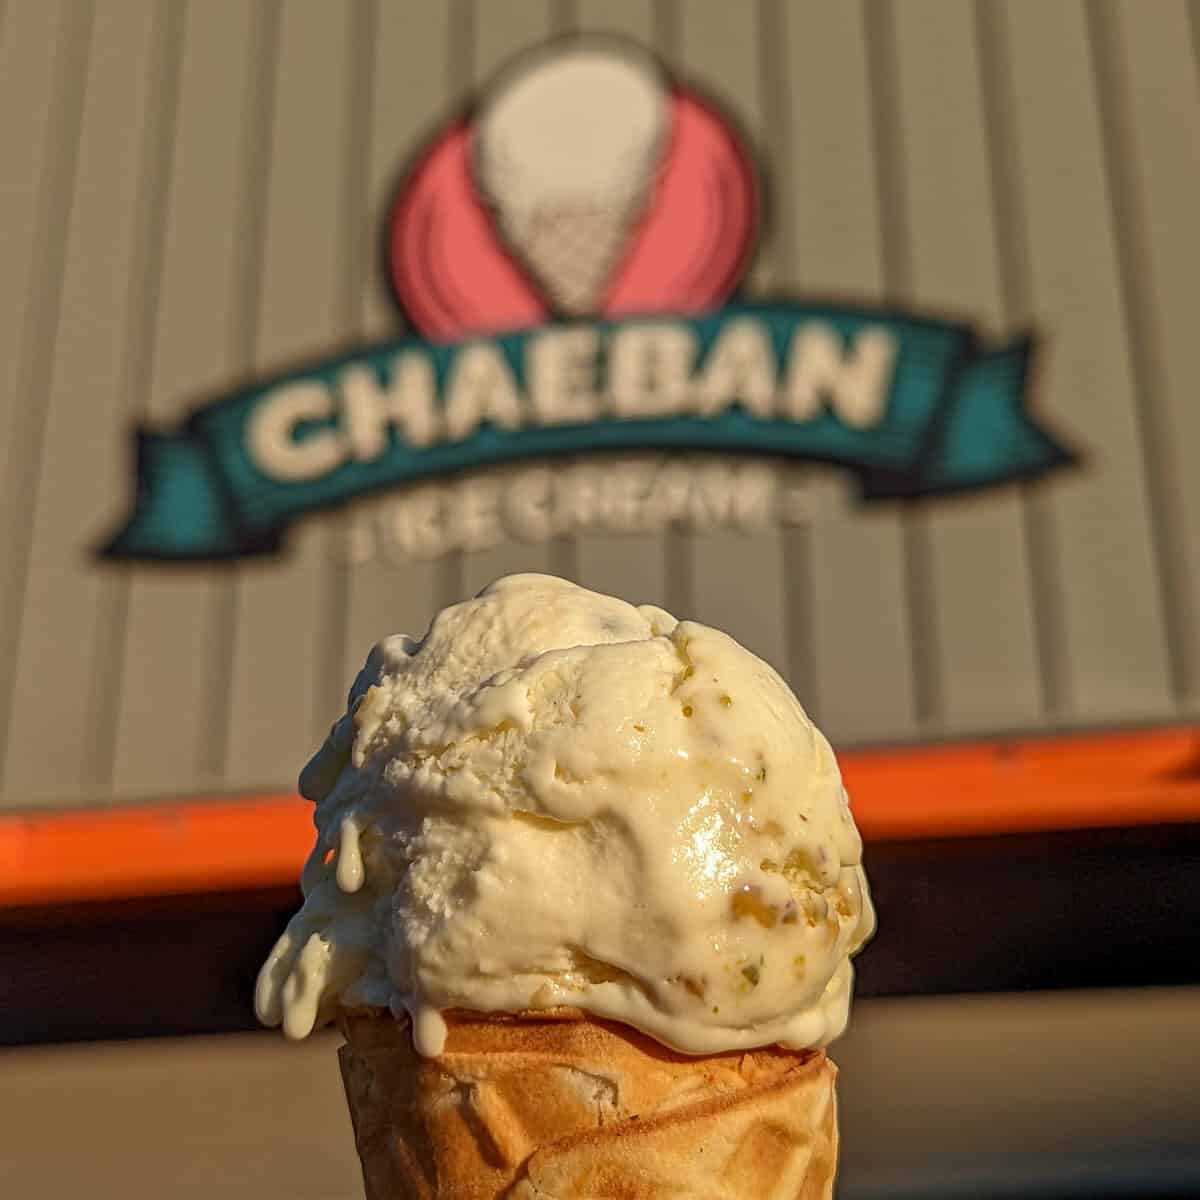 Chaeban Ice Cream makes our list for unique things to eat in Manitoba